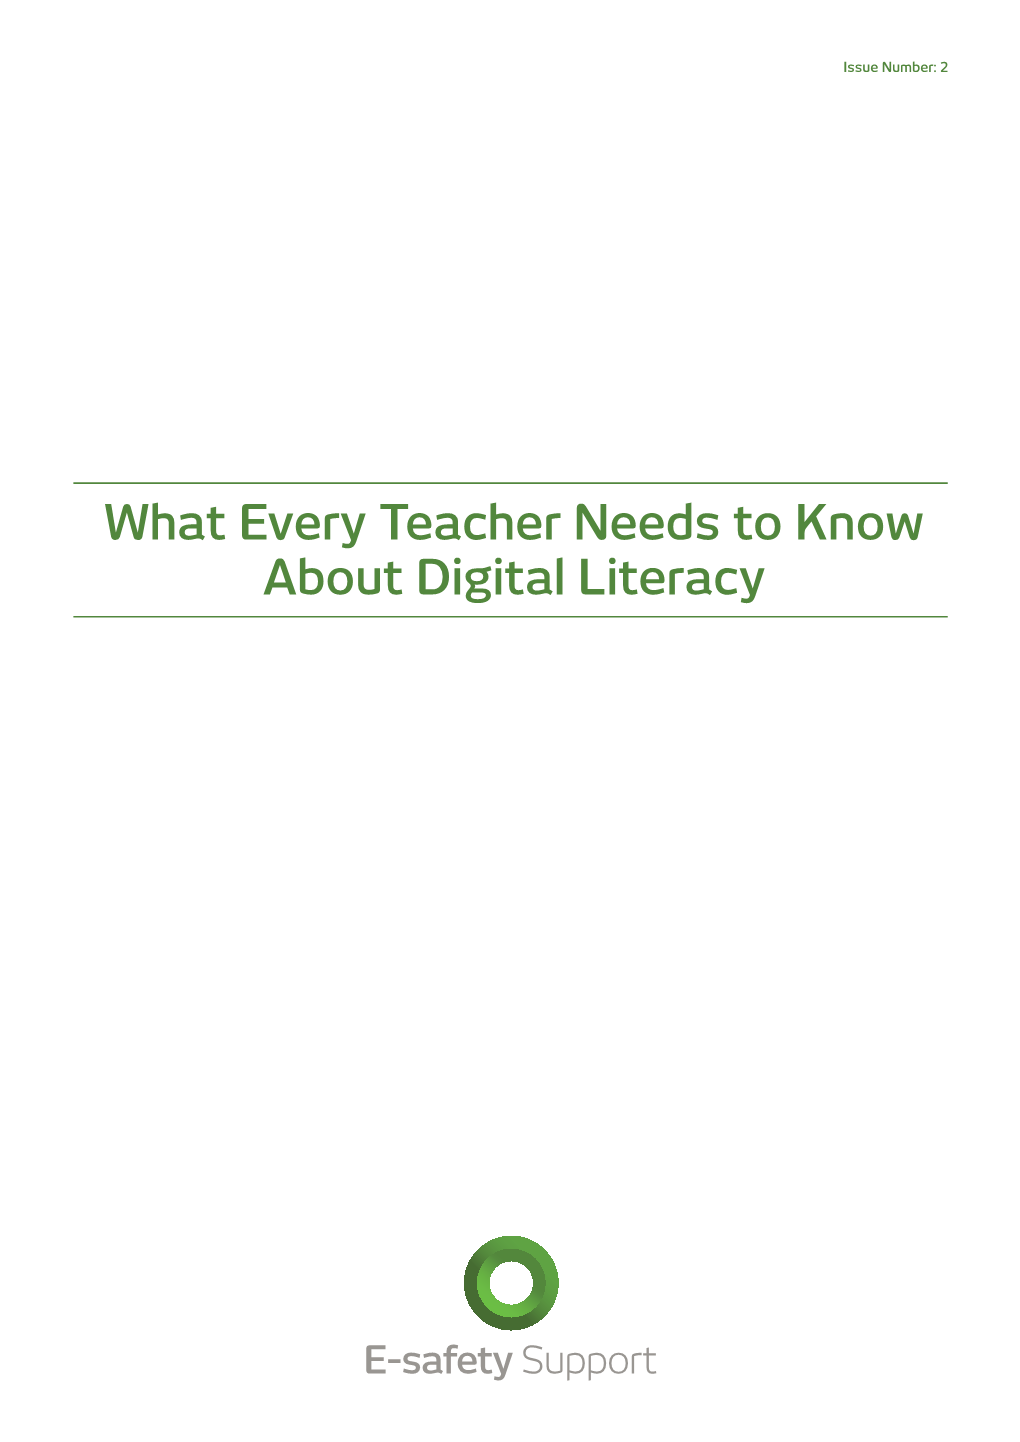 What Every Teacher Needs to Know About Digital Literacy Issue Number: 2